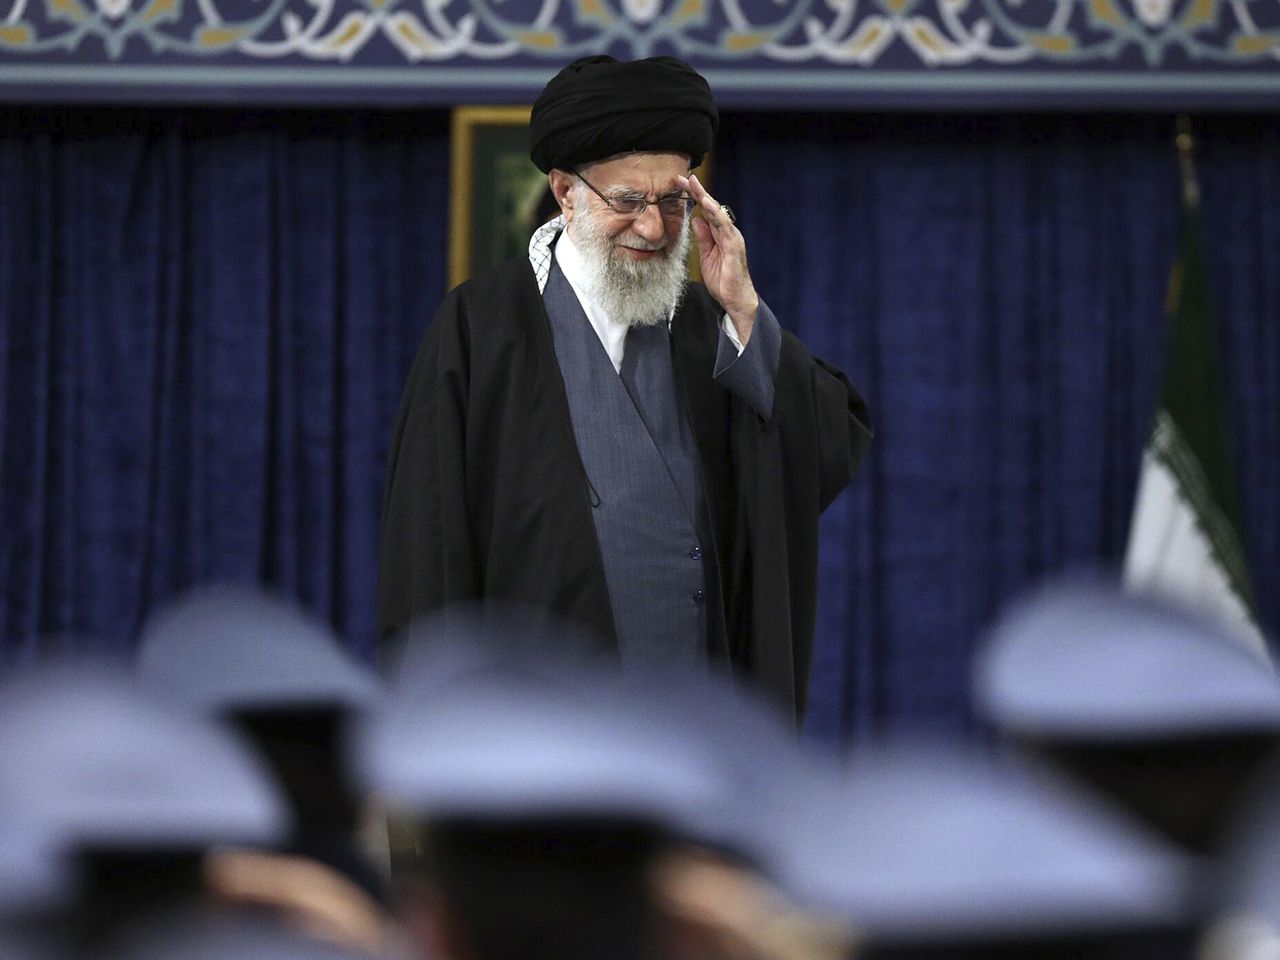 The accounts of Iran's Supreme Leader Ayatollah Ali Khamenei on Instagram and Facebook have been removed by Meta.